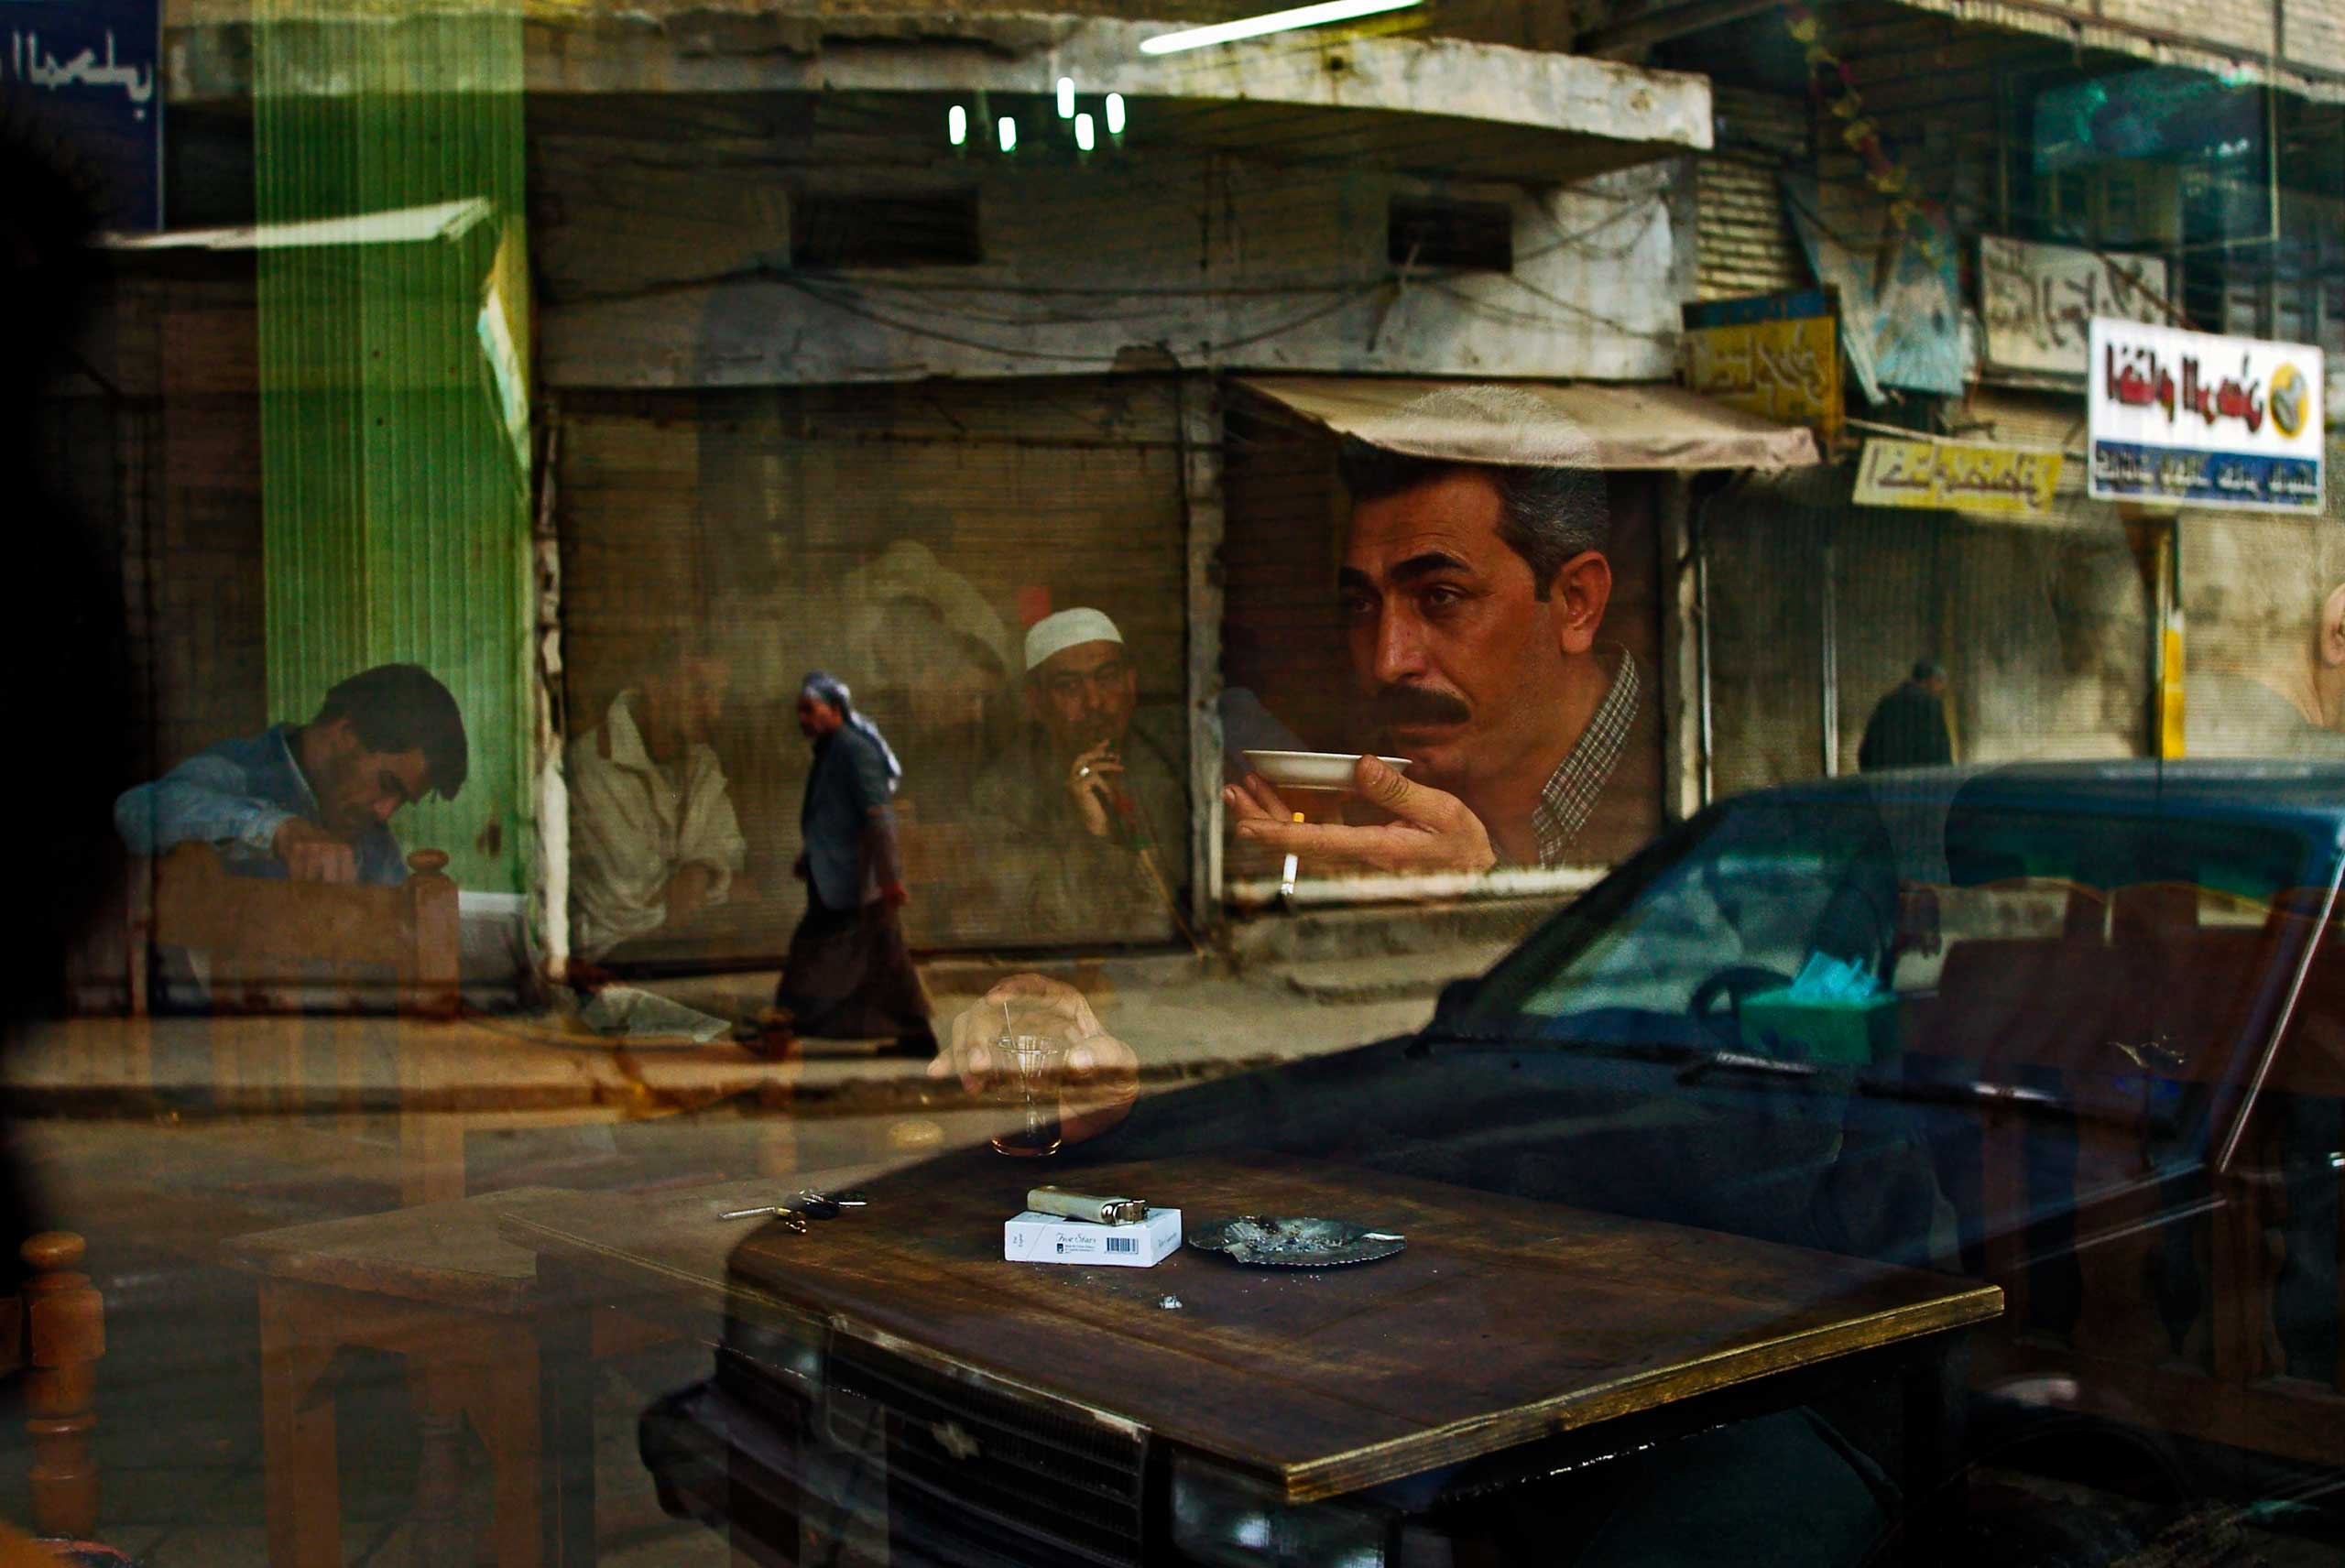 Bruno Stevens, Feb. 12, 2003
                              
                              The window of the Al Zahawi cafe in Rashid Street, named after a famous local poet and musician. Baghdad cafes are a trademark of this ancient city, places where men gather after prayer and play dominoes or blackjack with intense passion while drinking black or lemon tea or traditional arabic coffee (ka-wah). 
                              It was about 6 weeks before the war started that I took this image as a metaphor for the Iraqi population, a complex society whose people are framed by their own divisions and perspectives as well as having their fate determined by the outside world. To this day I believe that I somehow managed to encompass all those tensions and drama still to come in a single frame. I am in Baghdad at the moment, revisiting places and people from 10 years ago, and the Al Zahawi Caf is still one of my favorites.